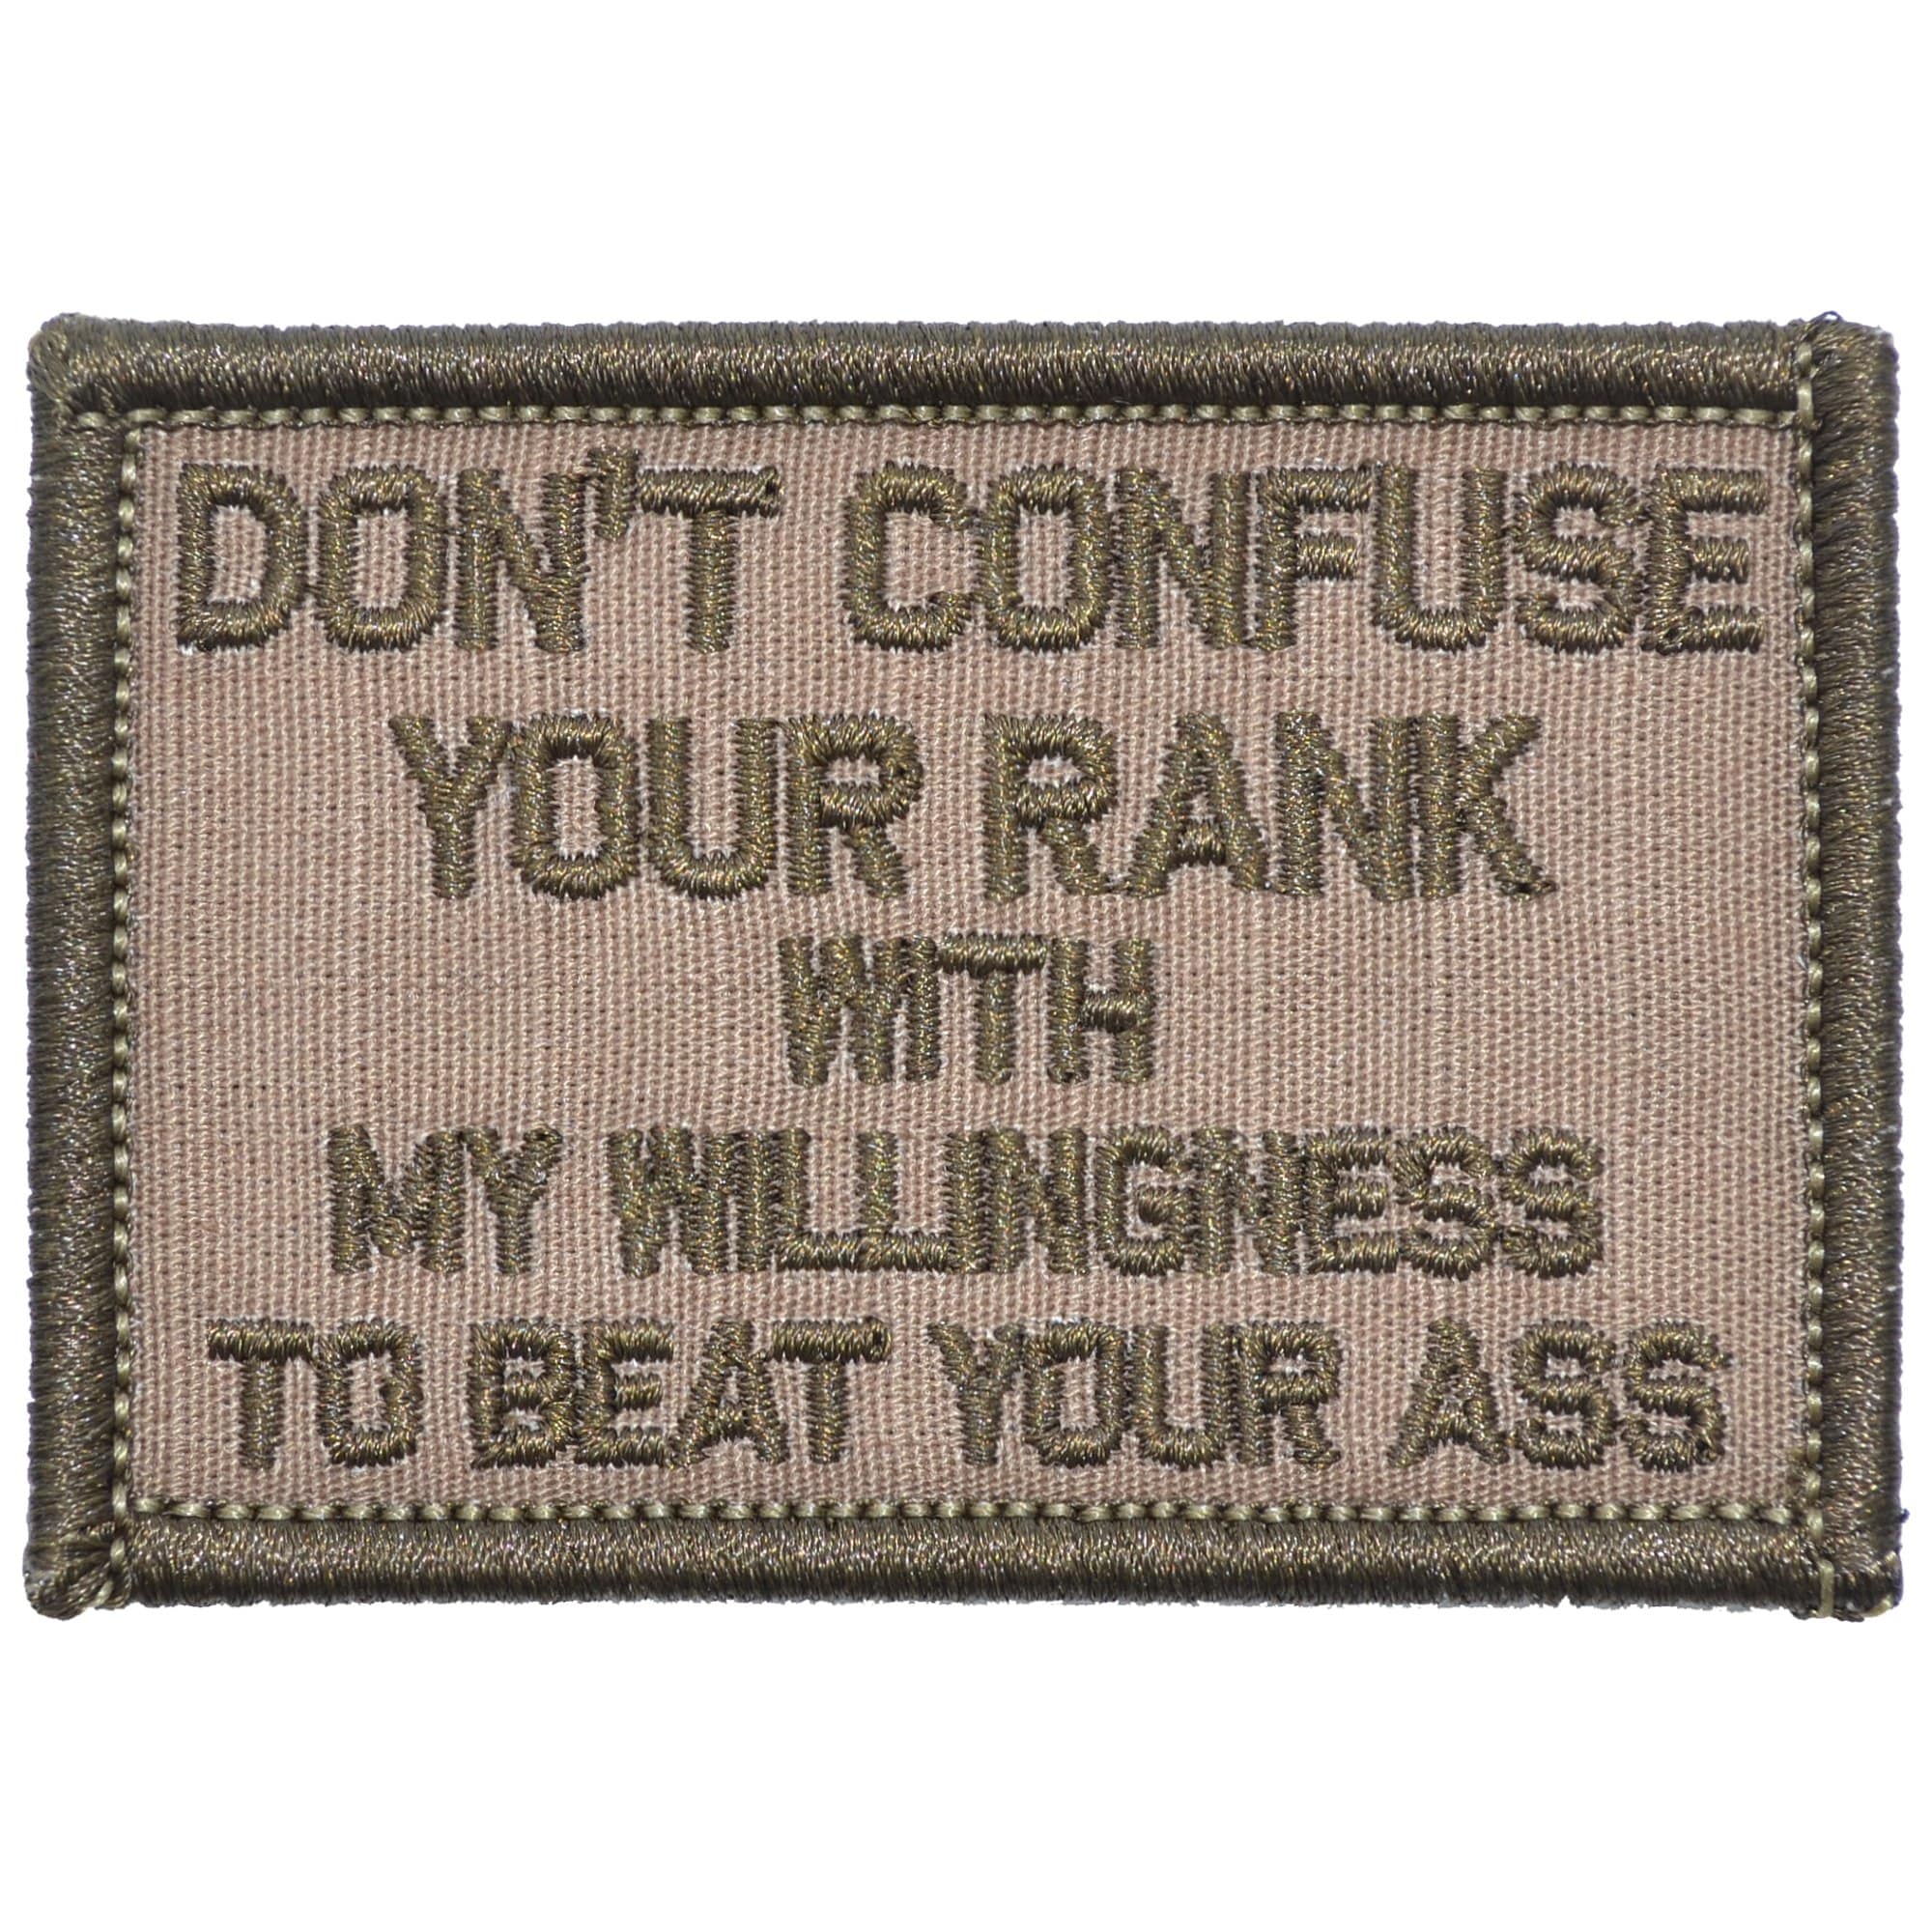 Tactical Gear Junkie Patches Coyote Brown Don't Confuse Your Rank With My Willingness To Beat Your Ass - 2x3 Patch